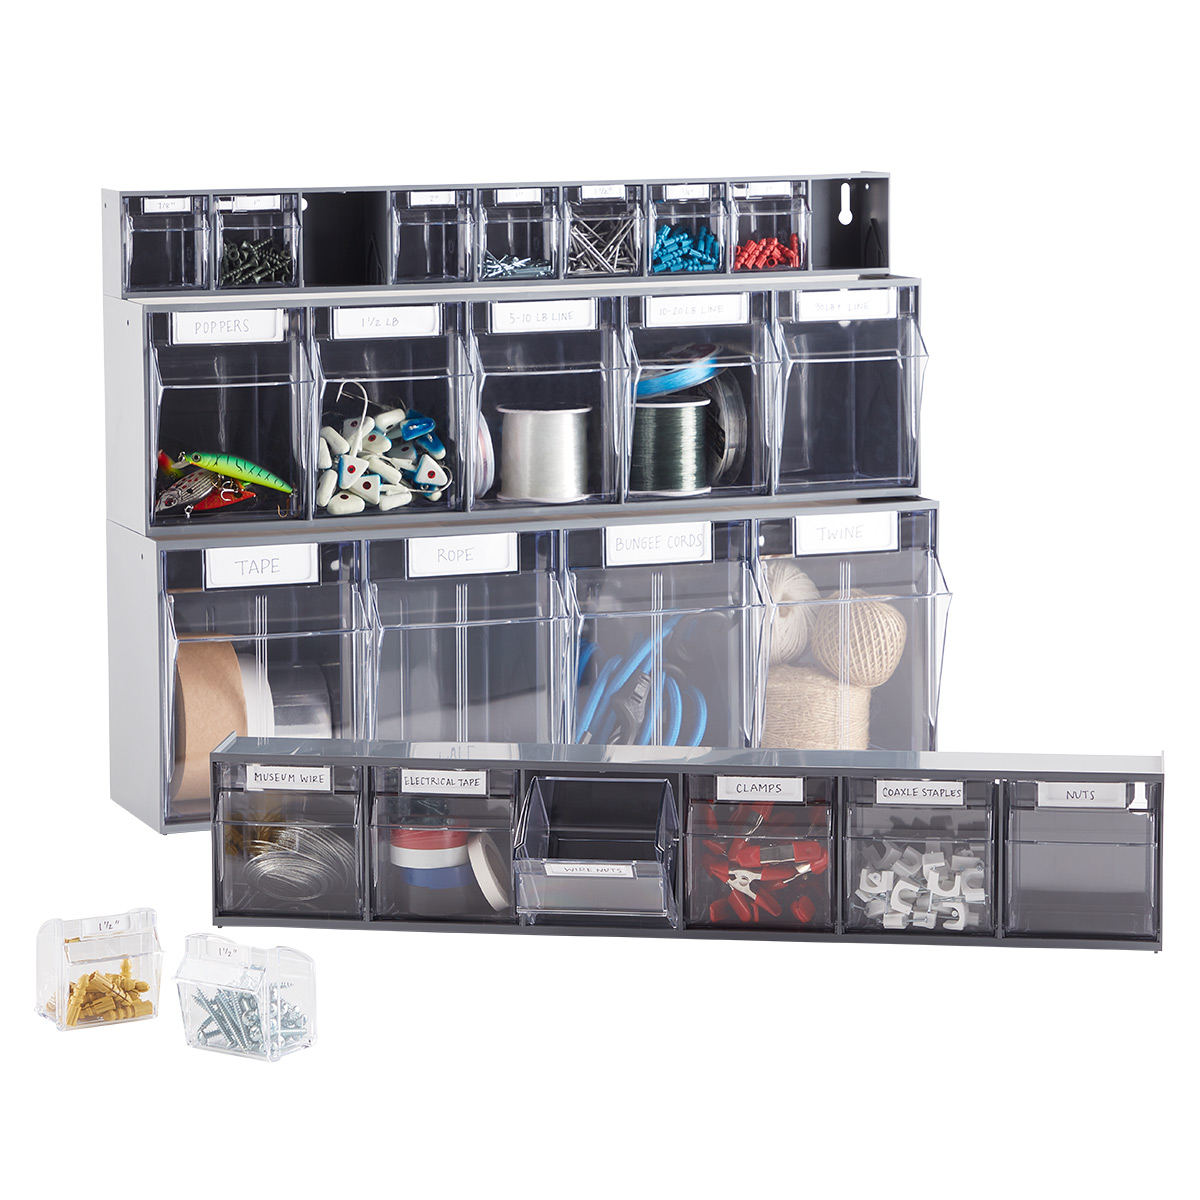 STORAGE TIP OUT OPEN BIN BINS 9 COMPARTMENT STACKABLE or WALL MOUNT ORGANIZER 